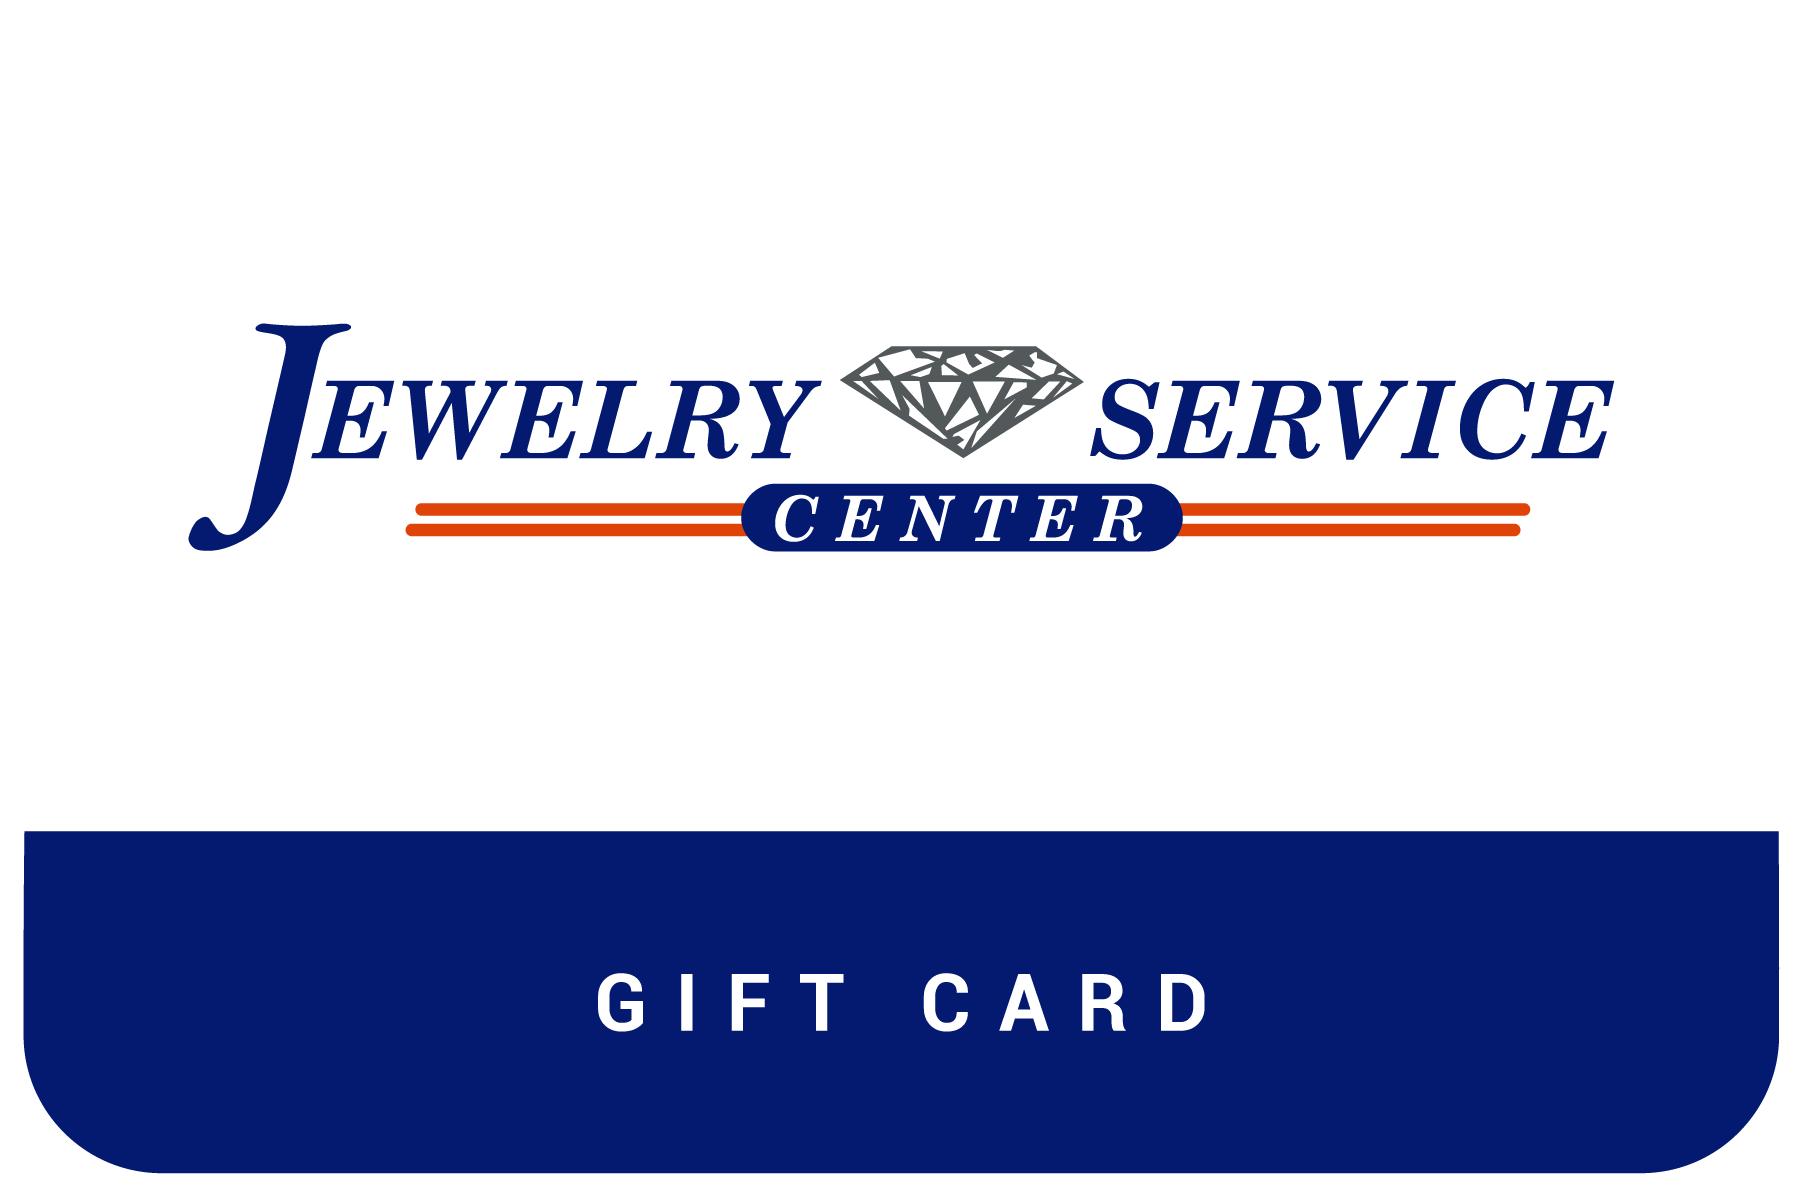 Jewelry Service Center $250 Gift Card